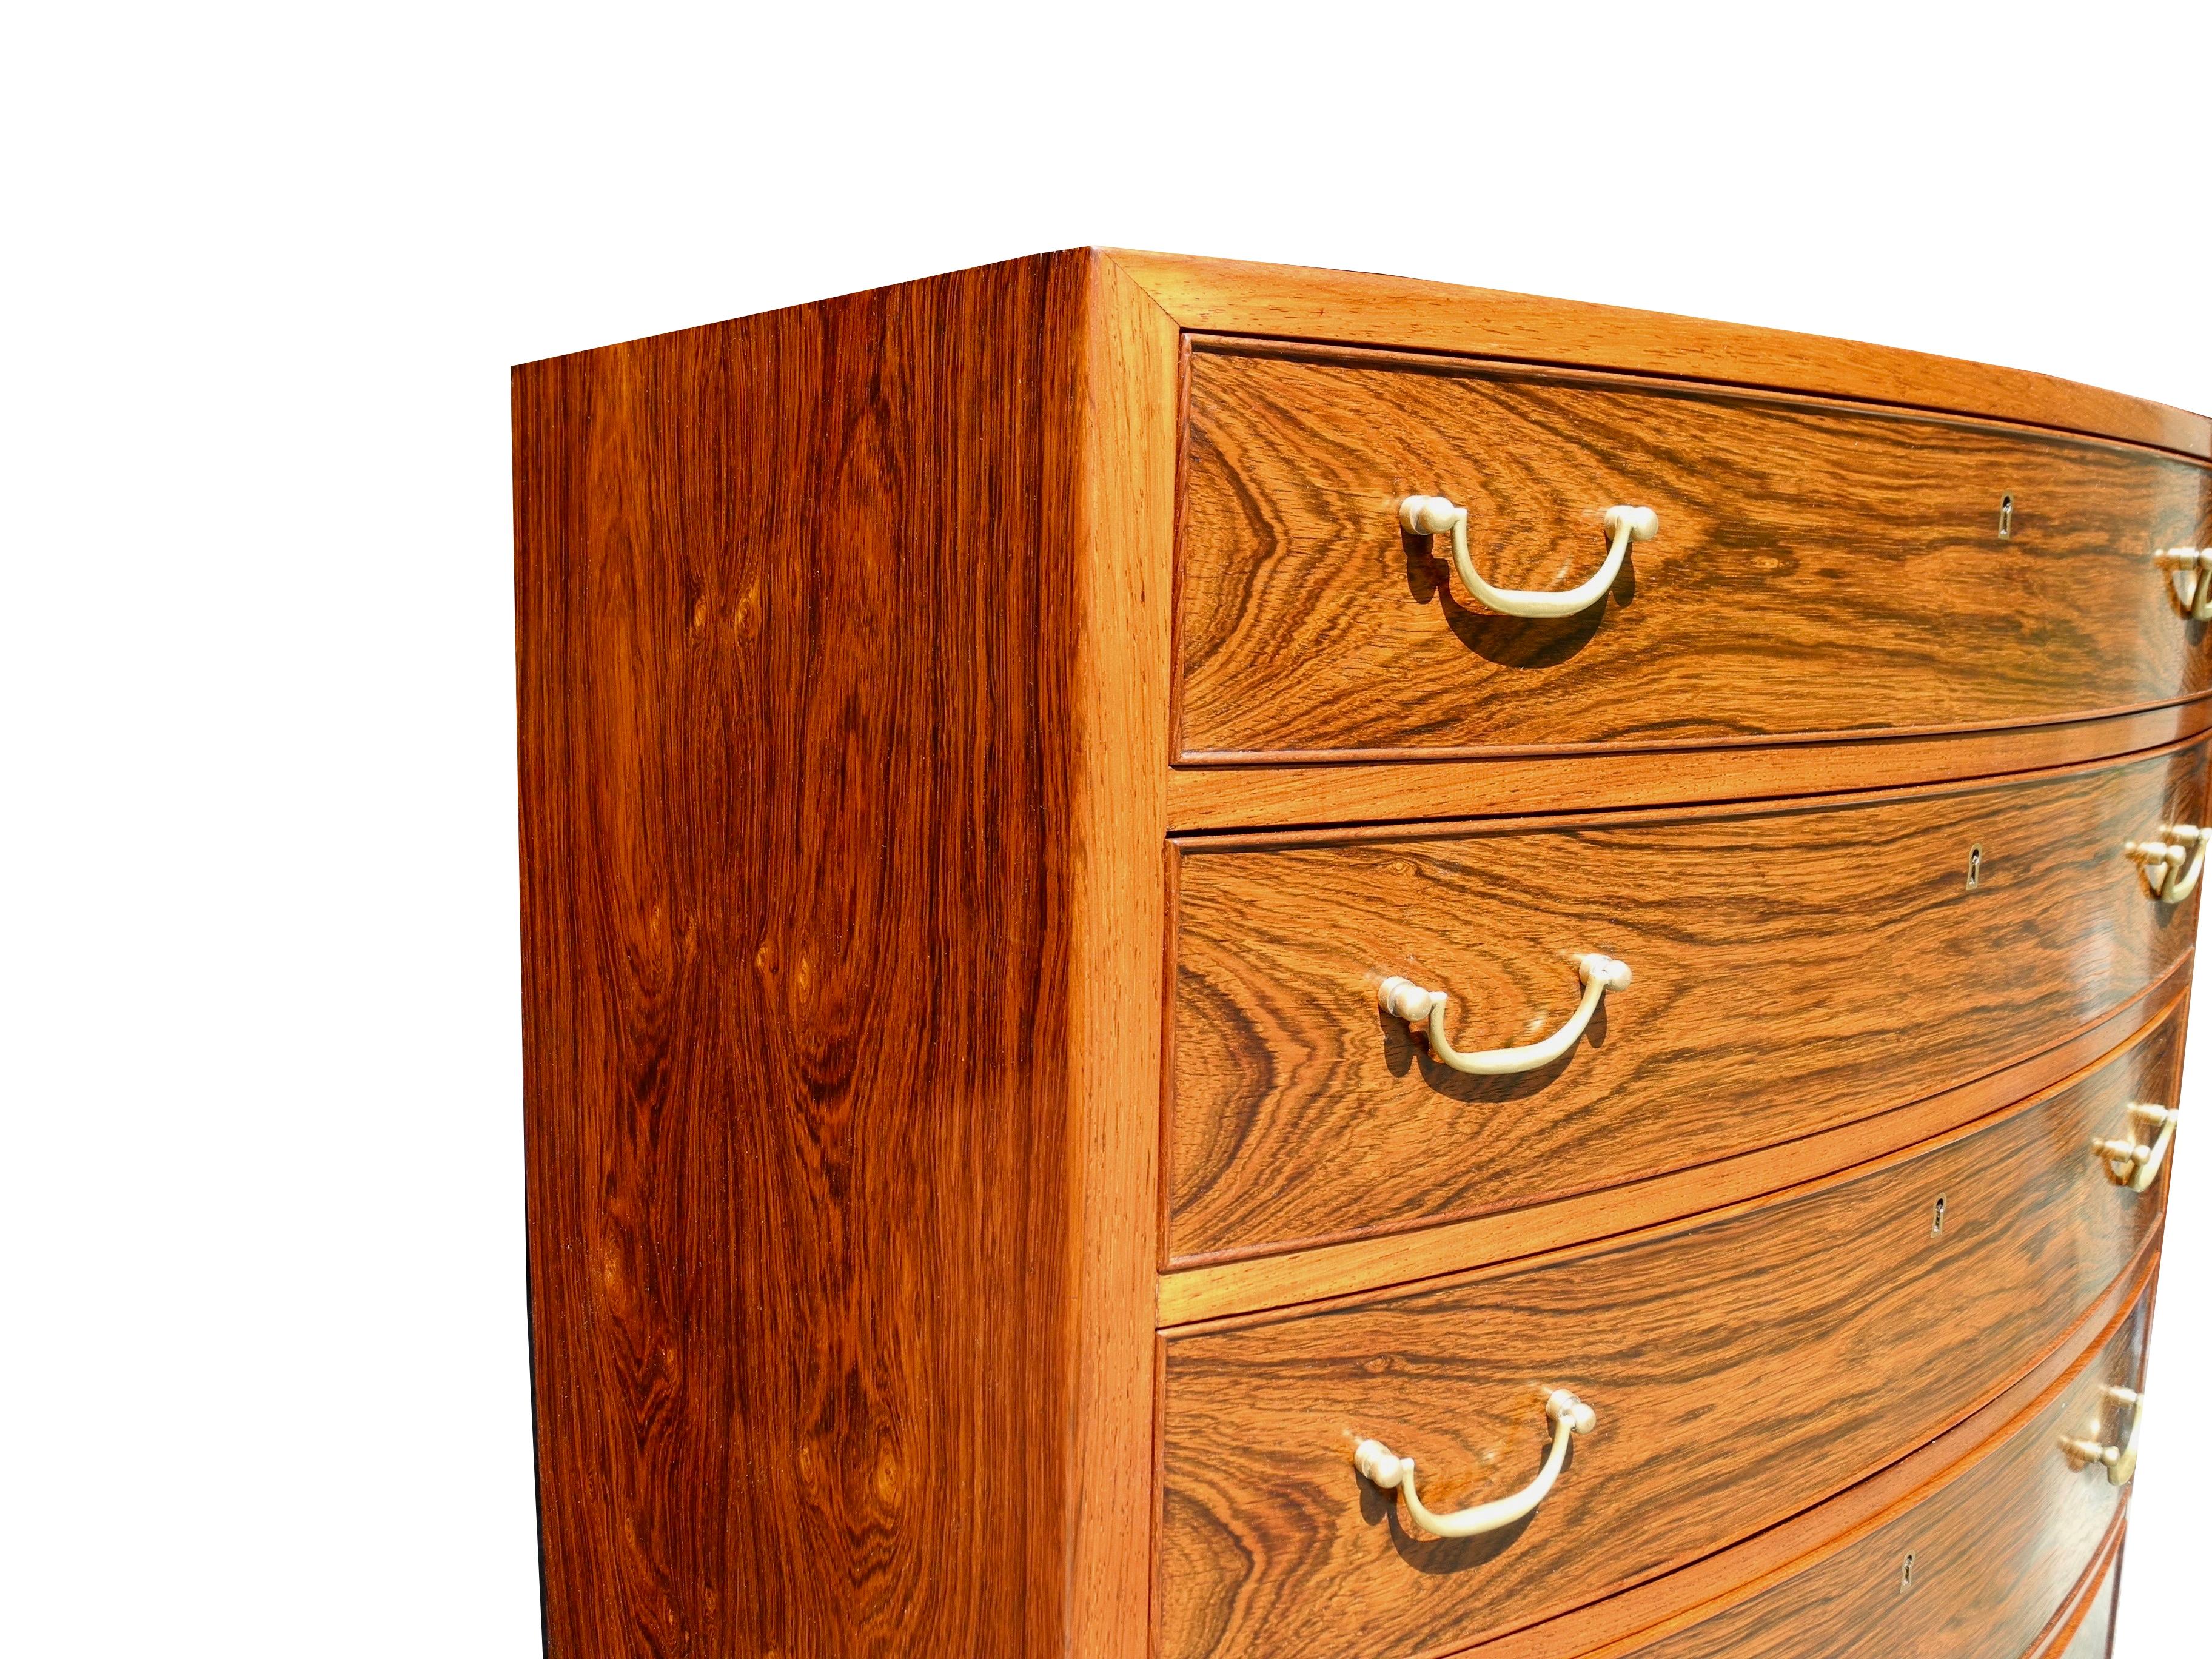 20th Century Danish Modern Tall Rosewood Bombe Dresser or Chest of Drawers by Ole Wanscher For Sale